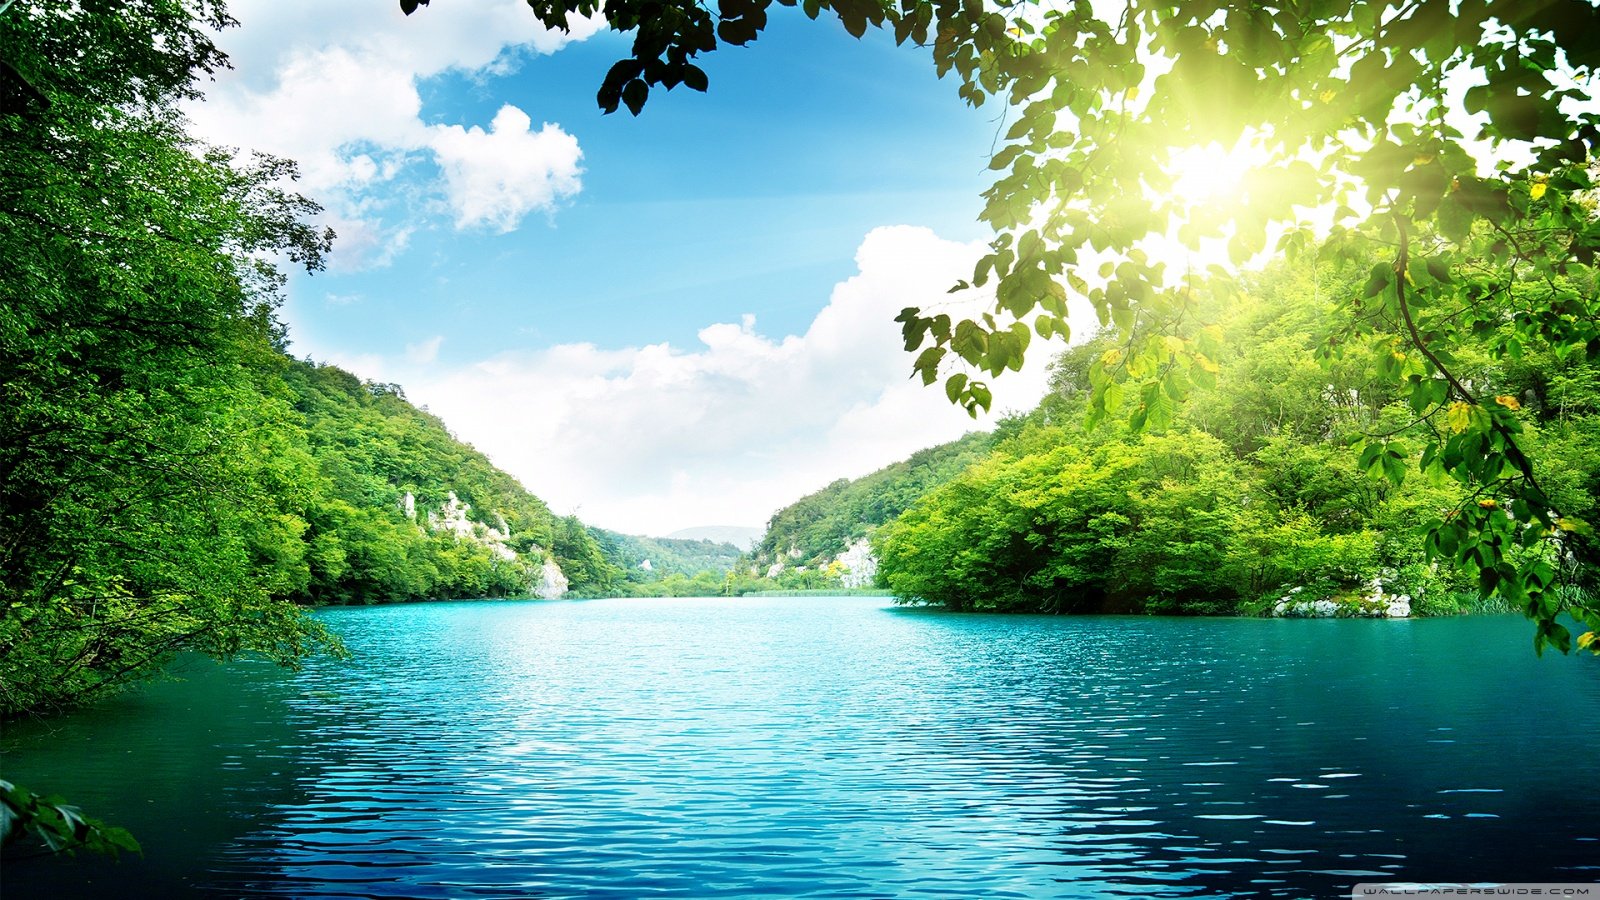 Peaceful Desktop Backgrounds   HD Wallpapers and Pictures